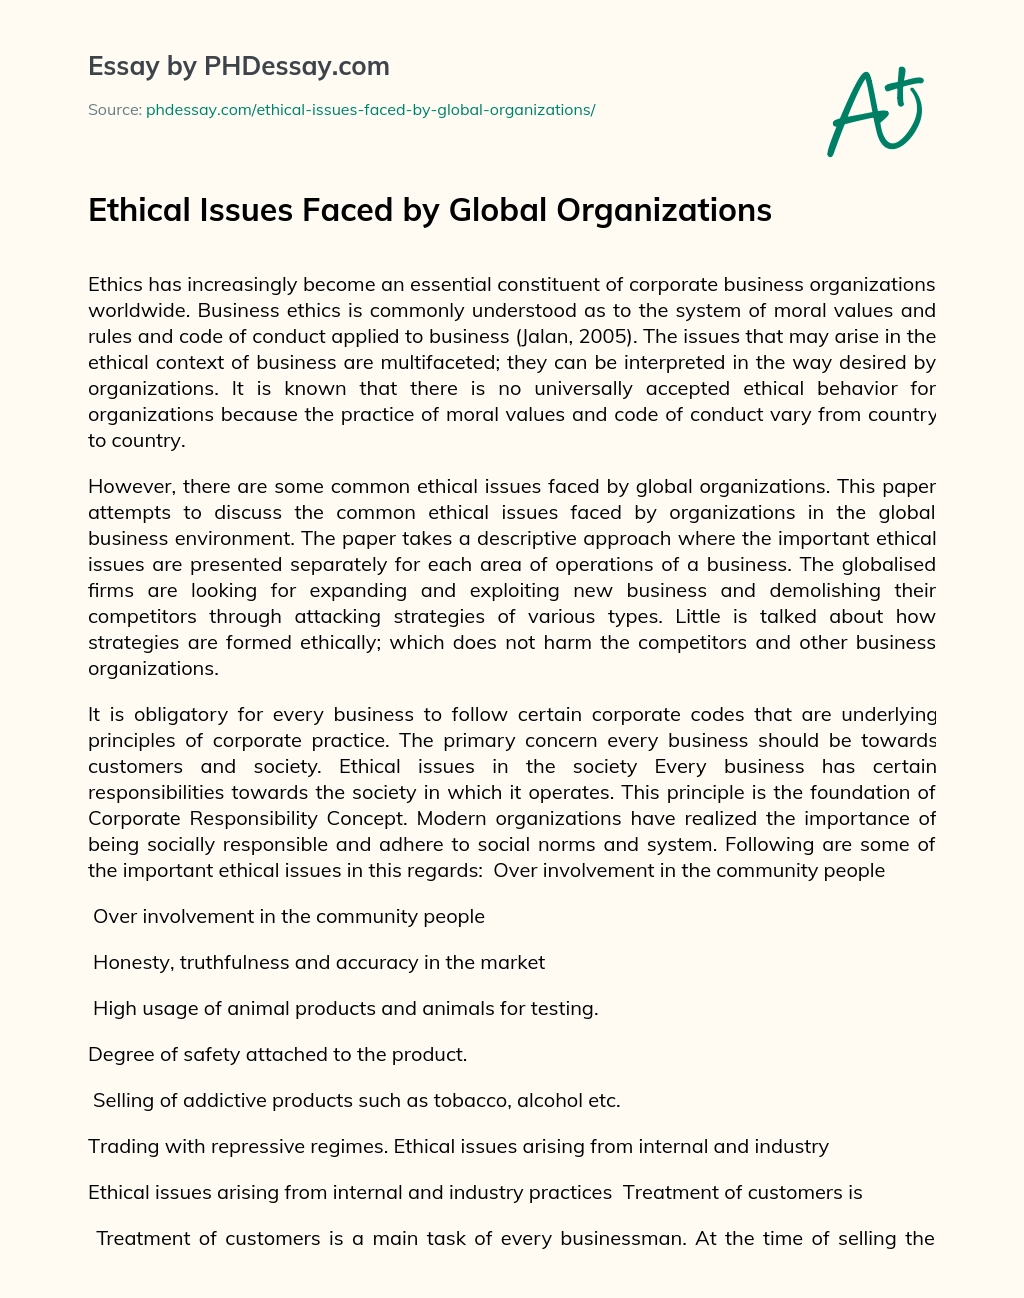 Ethical Issues Faced by Global Organizations essay